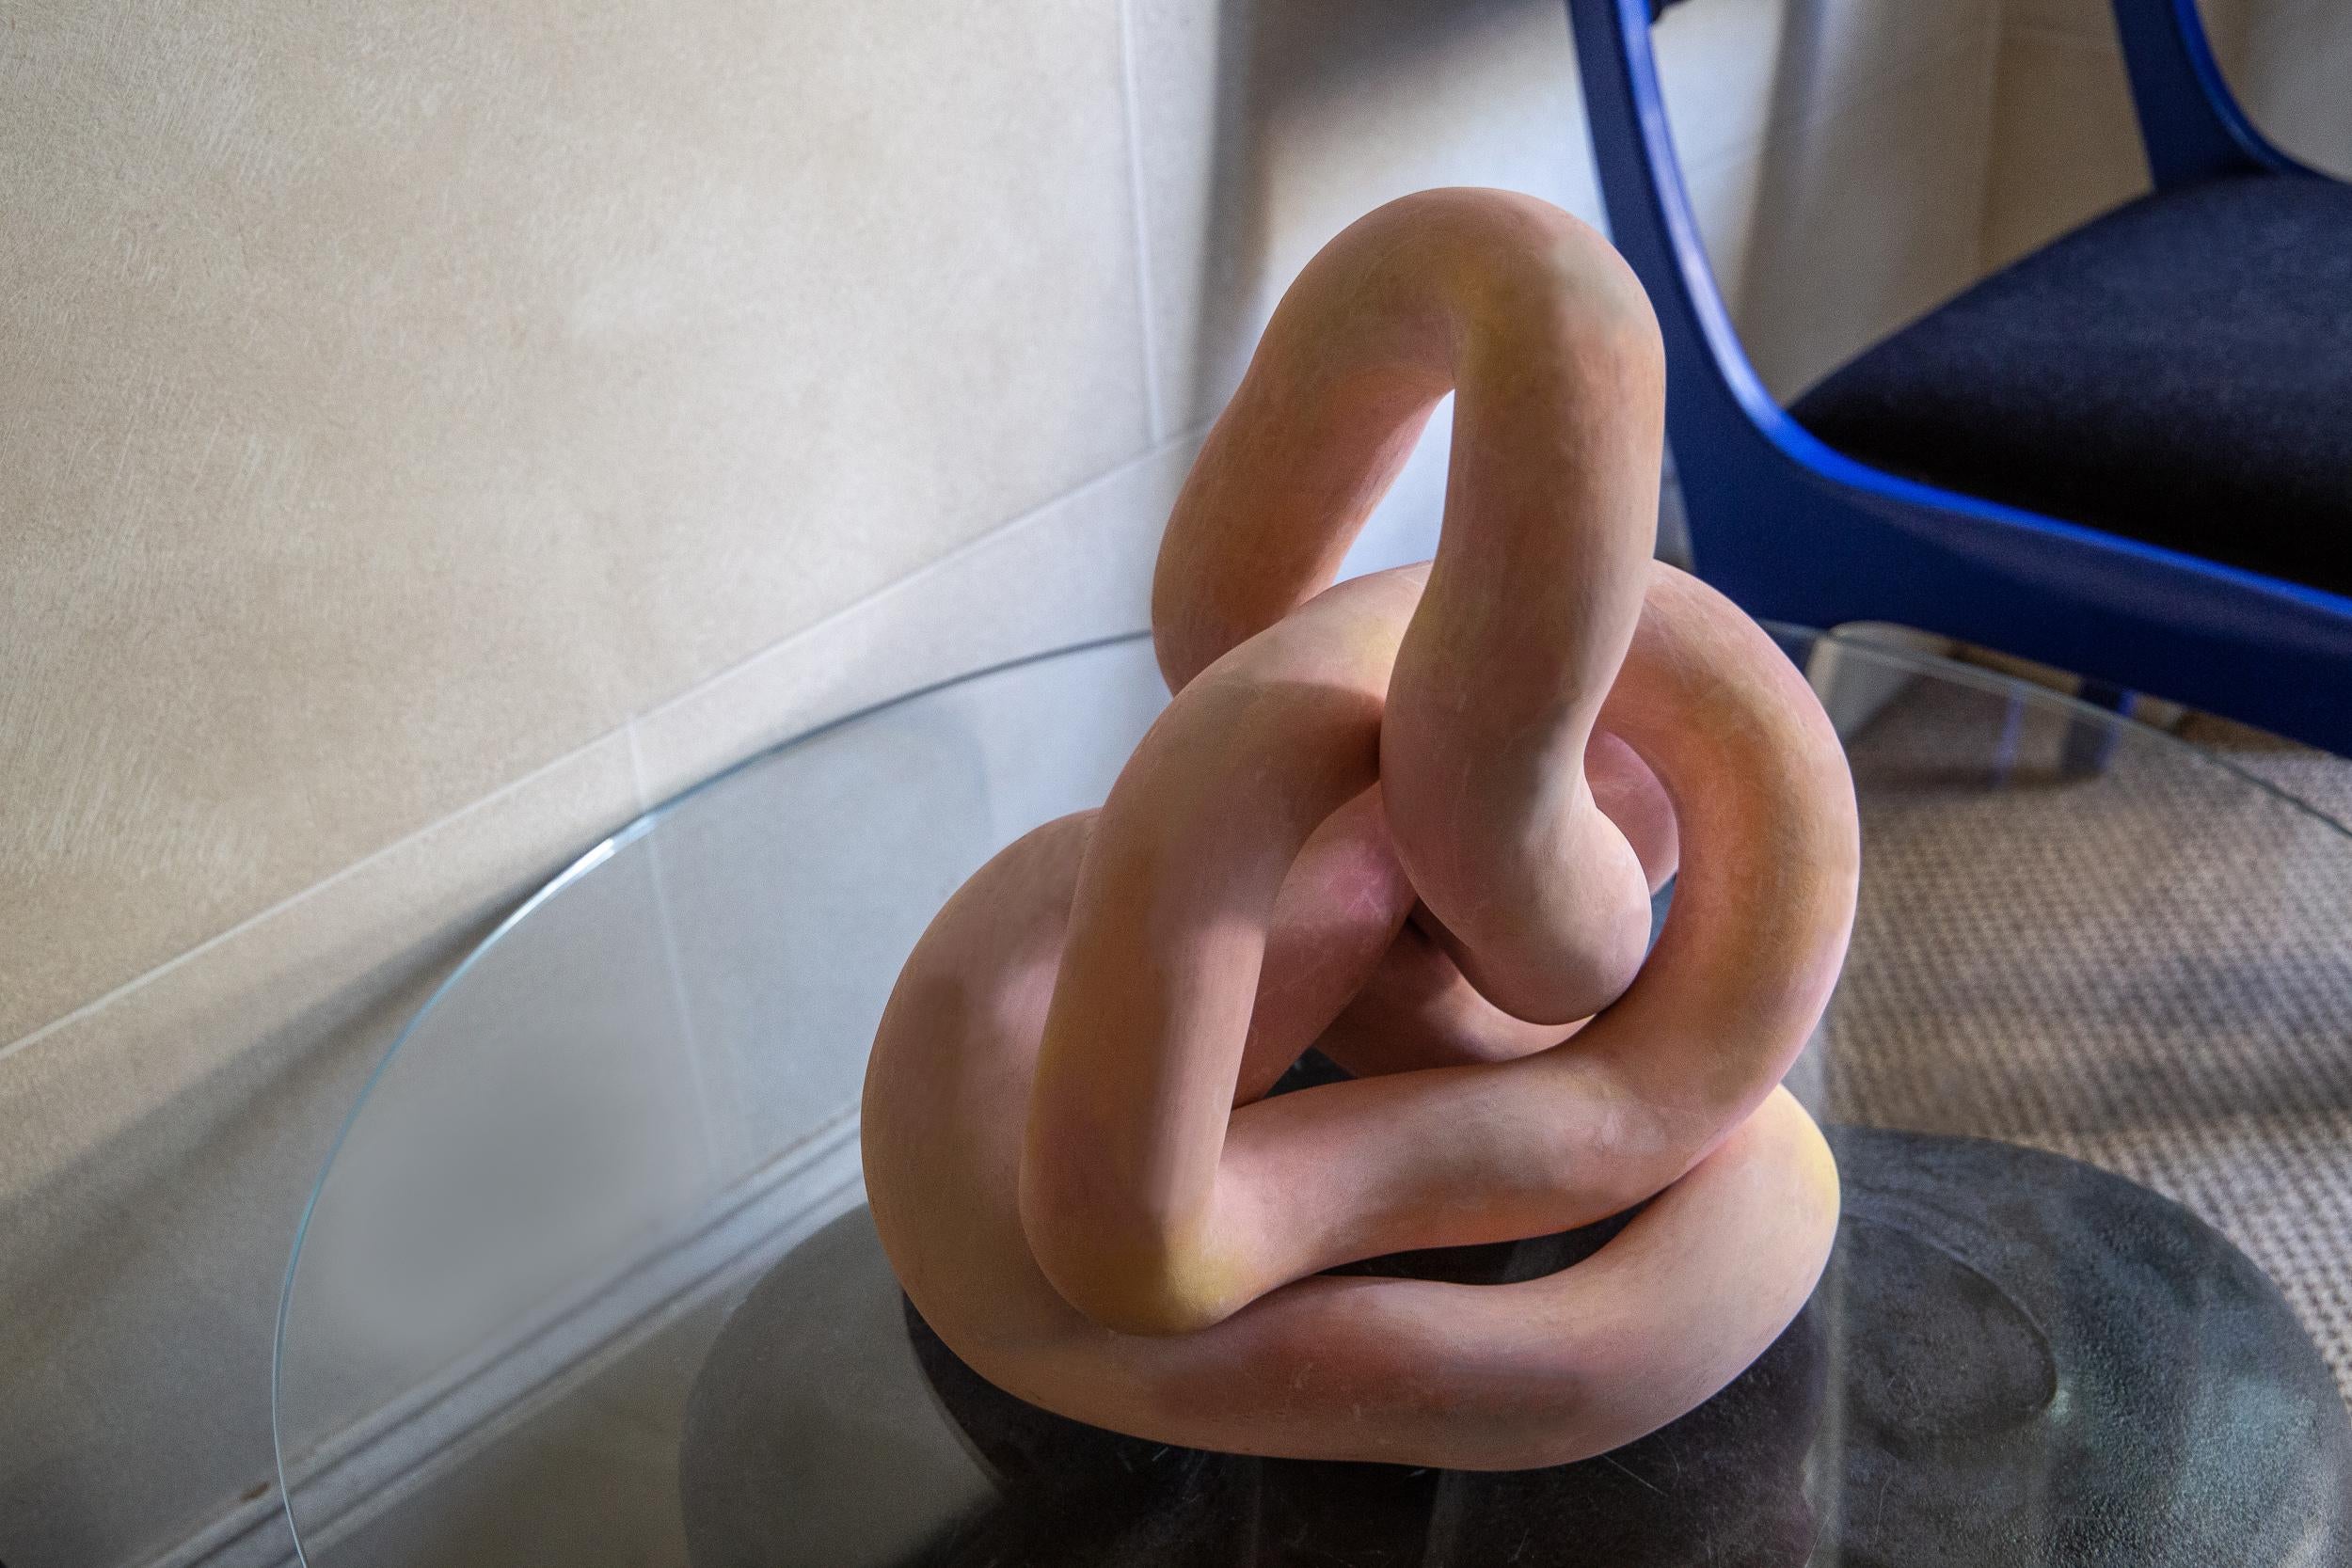 Chinese Pink Iilusion by Hua Wang, a Contemporary Interlinked Ceramic Sculpture, 2019